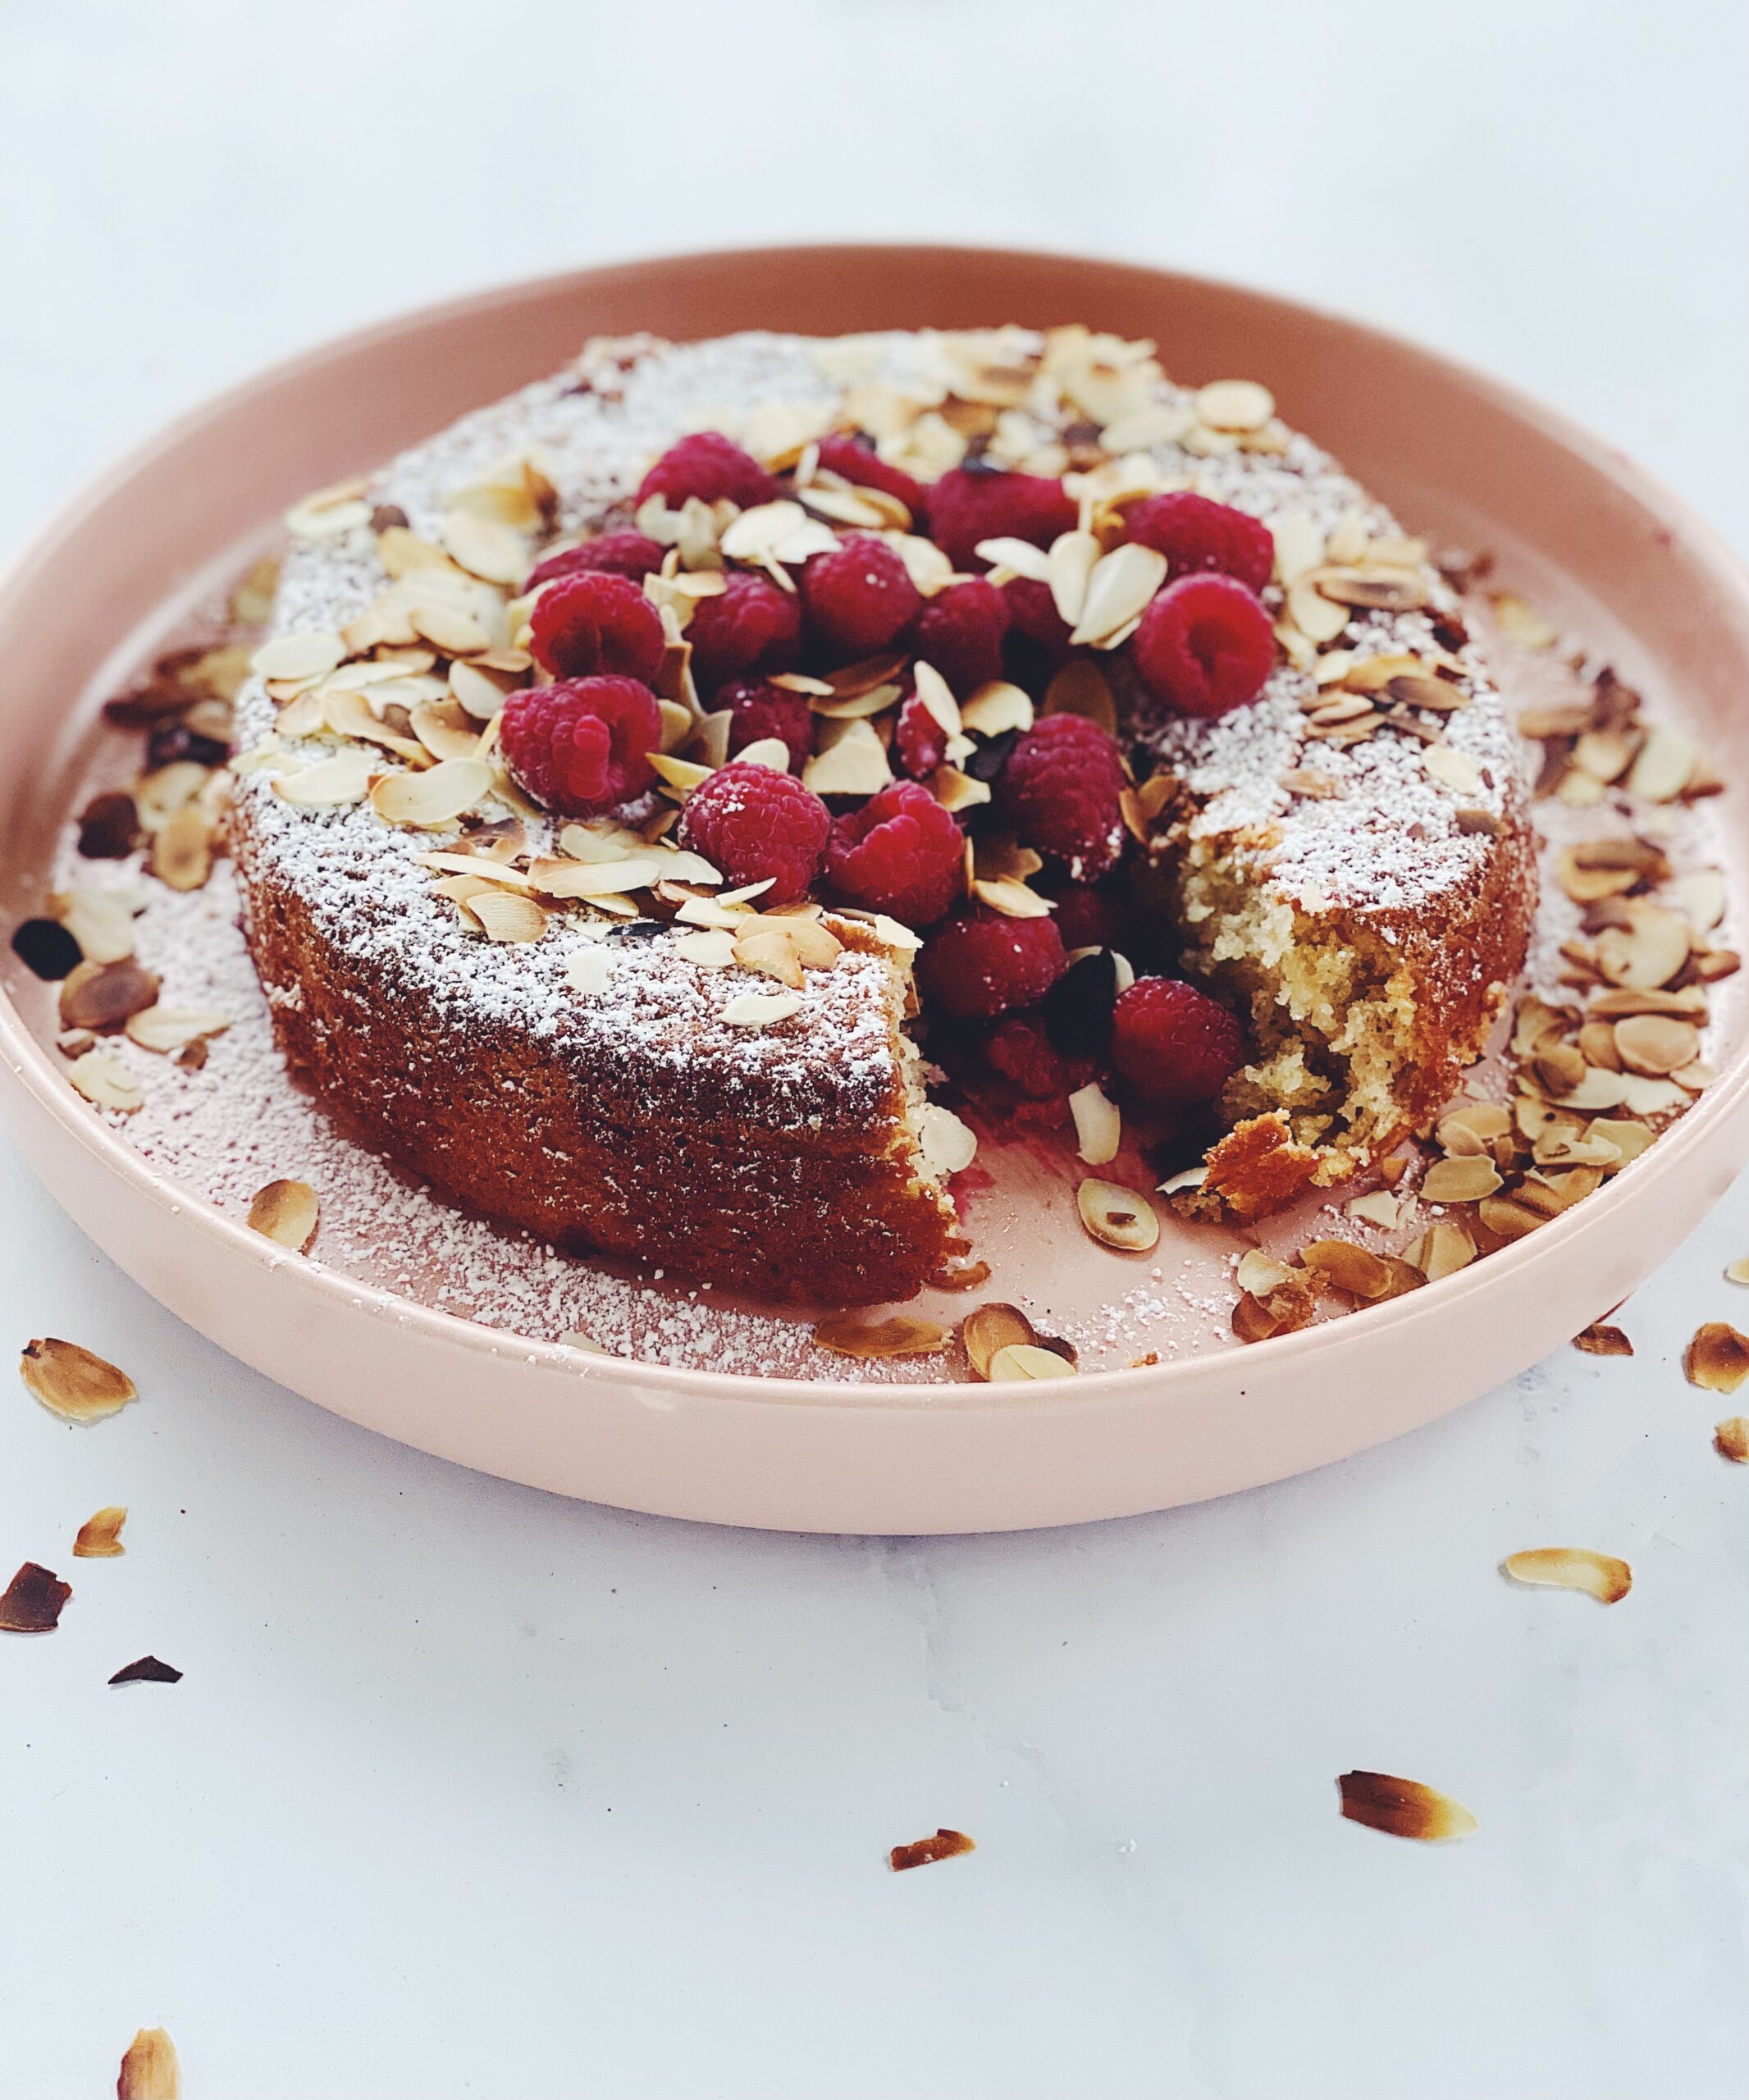 Raspberry,almond and coconut cake by Belinda Jeffery, Raspberry, almond and coconut cake